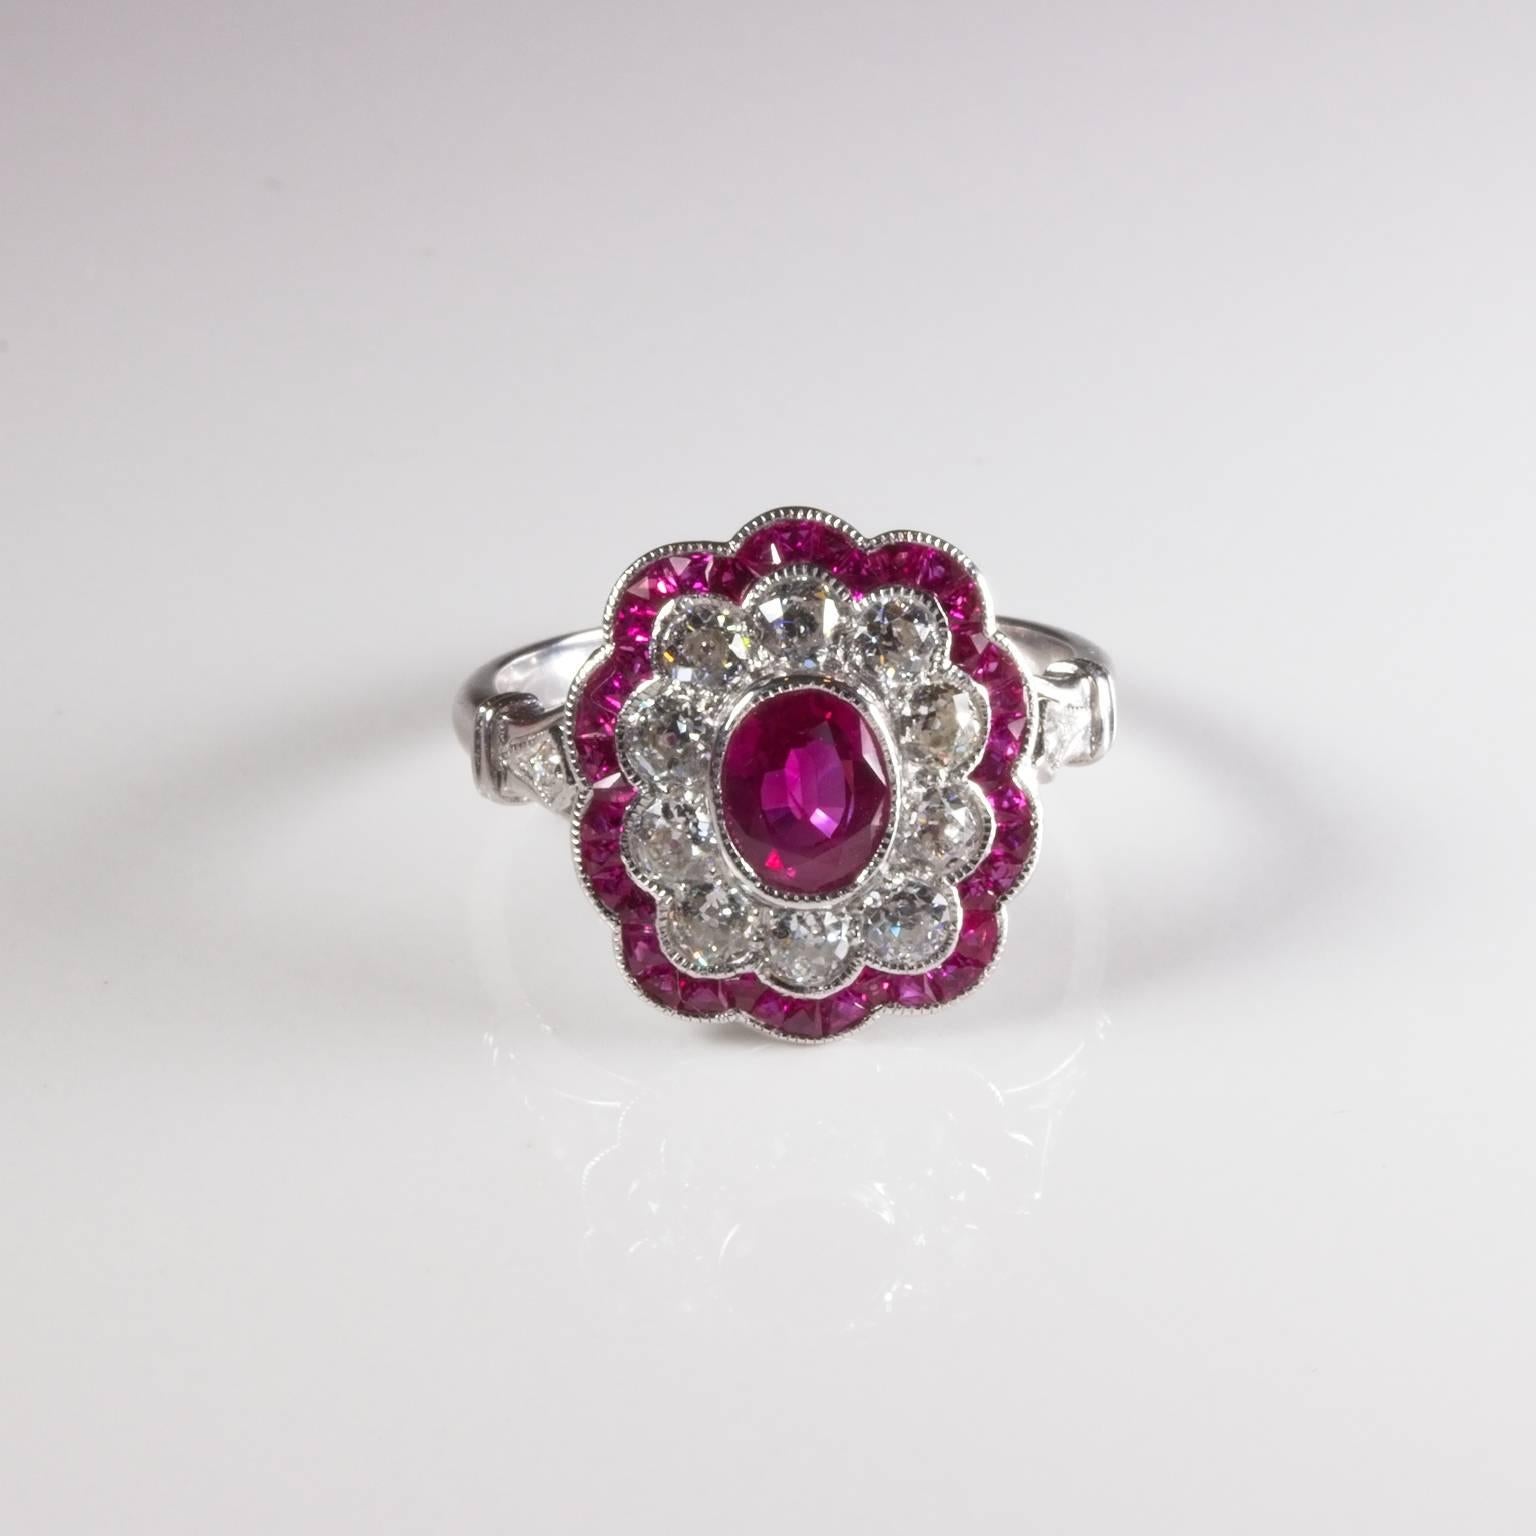 Stunning 18ct white gold ruby and diamond cluster ring bezel set with an oval facetted centre strong pink/red ruby surrounded by 10 old European cut diamonds of 0.07ct each colour I-J clarity VS-SI surrounded by 44 fancy cut rubies and 2 shoulder